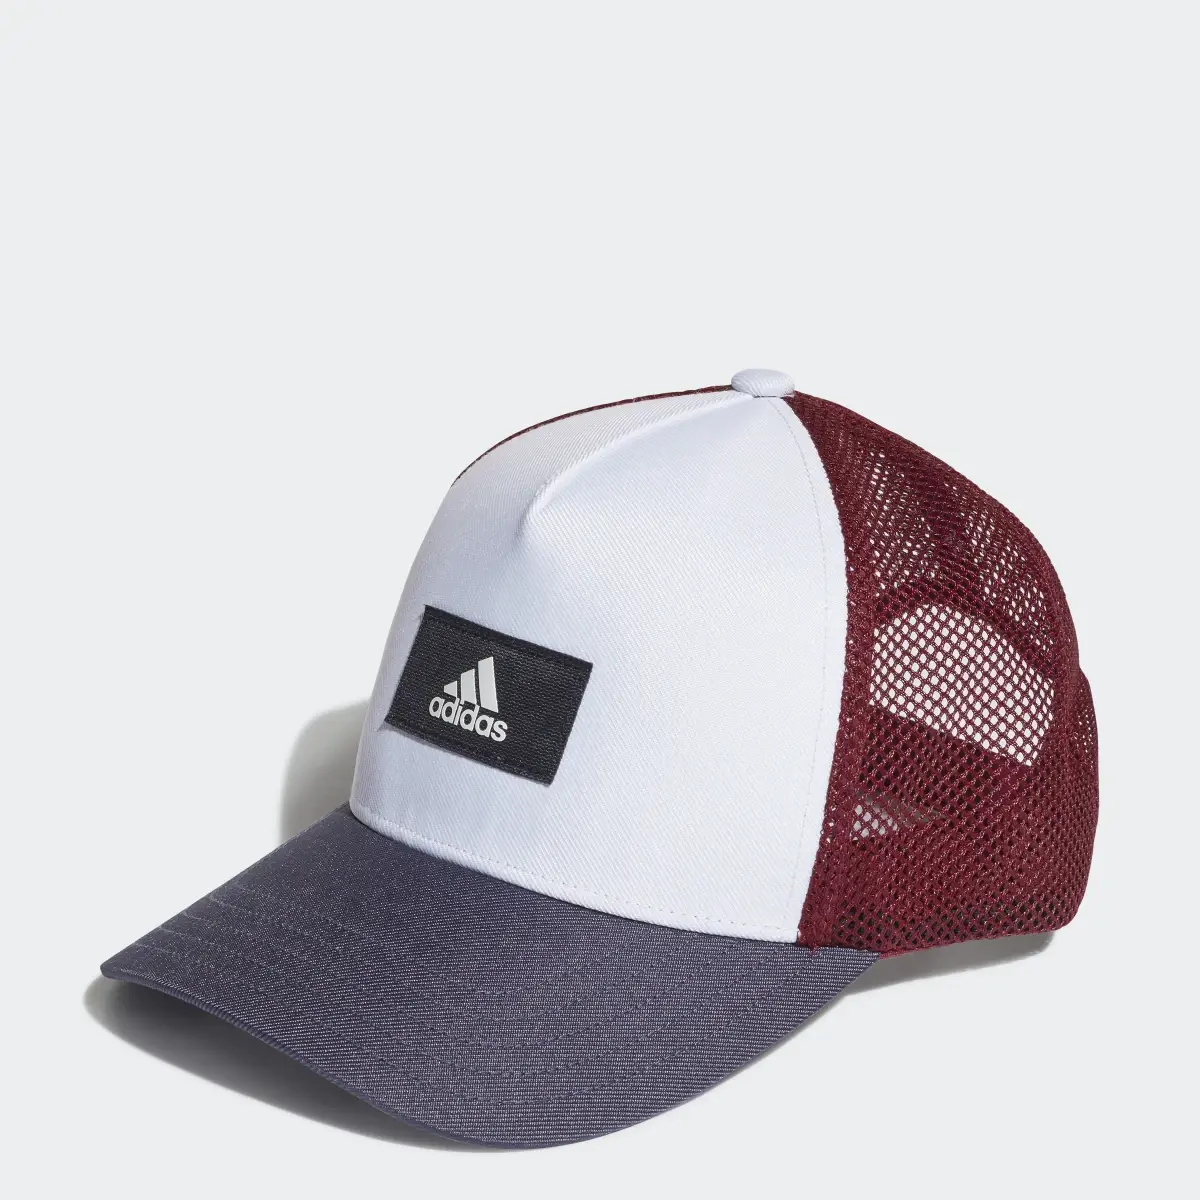 Adidas Casquette Snapback Curved Trucker. 1